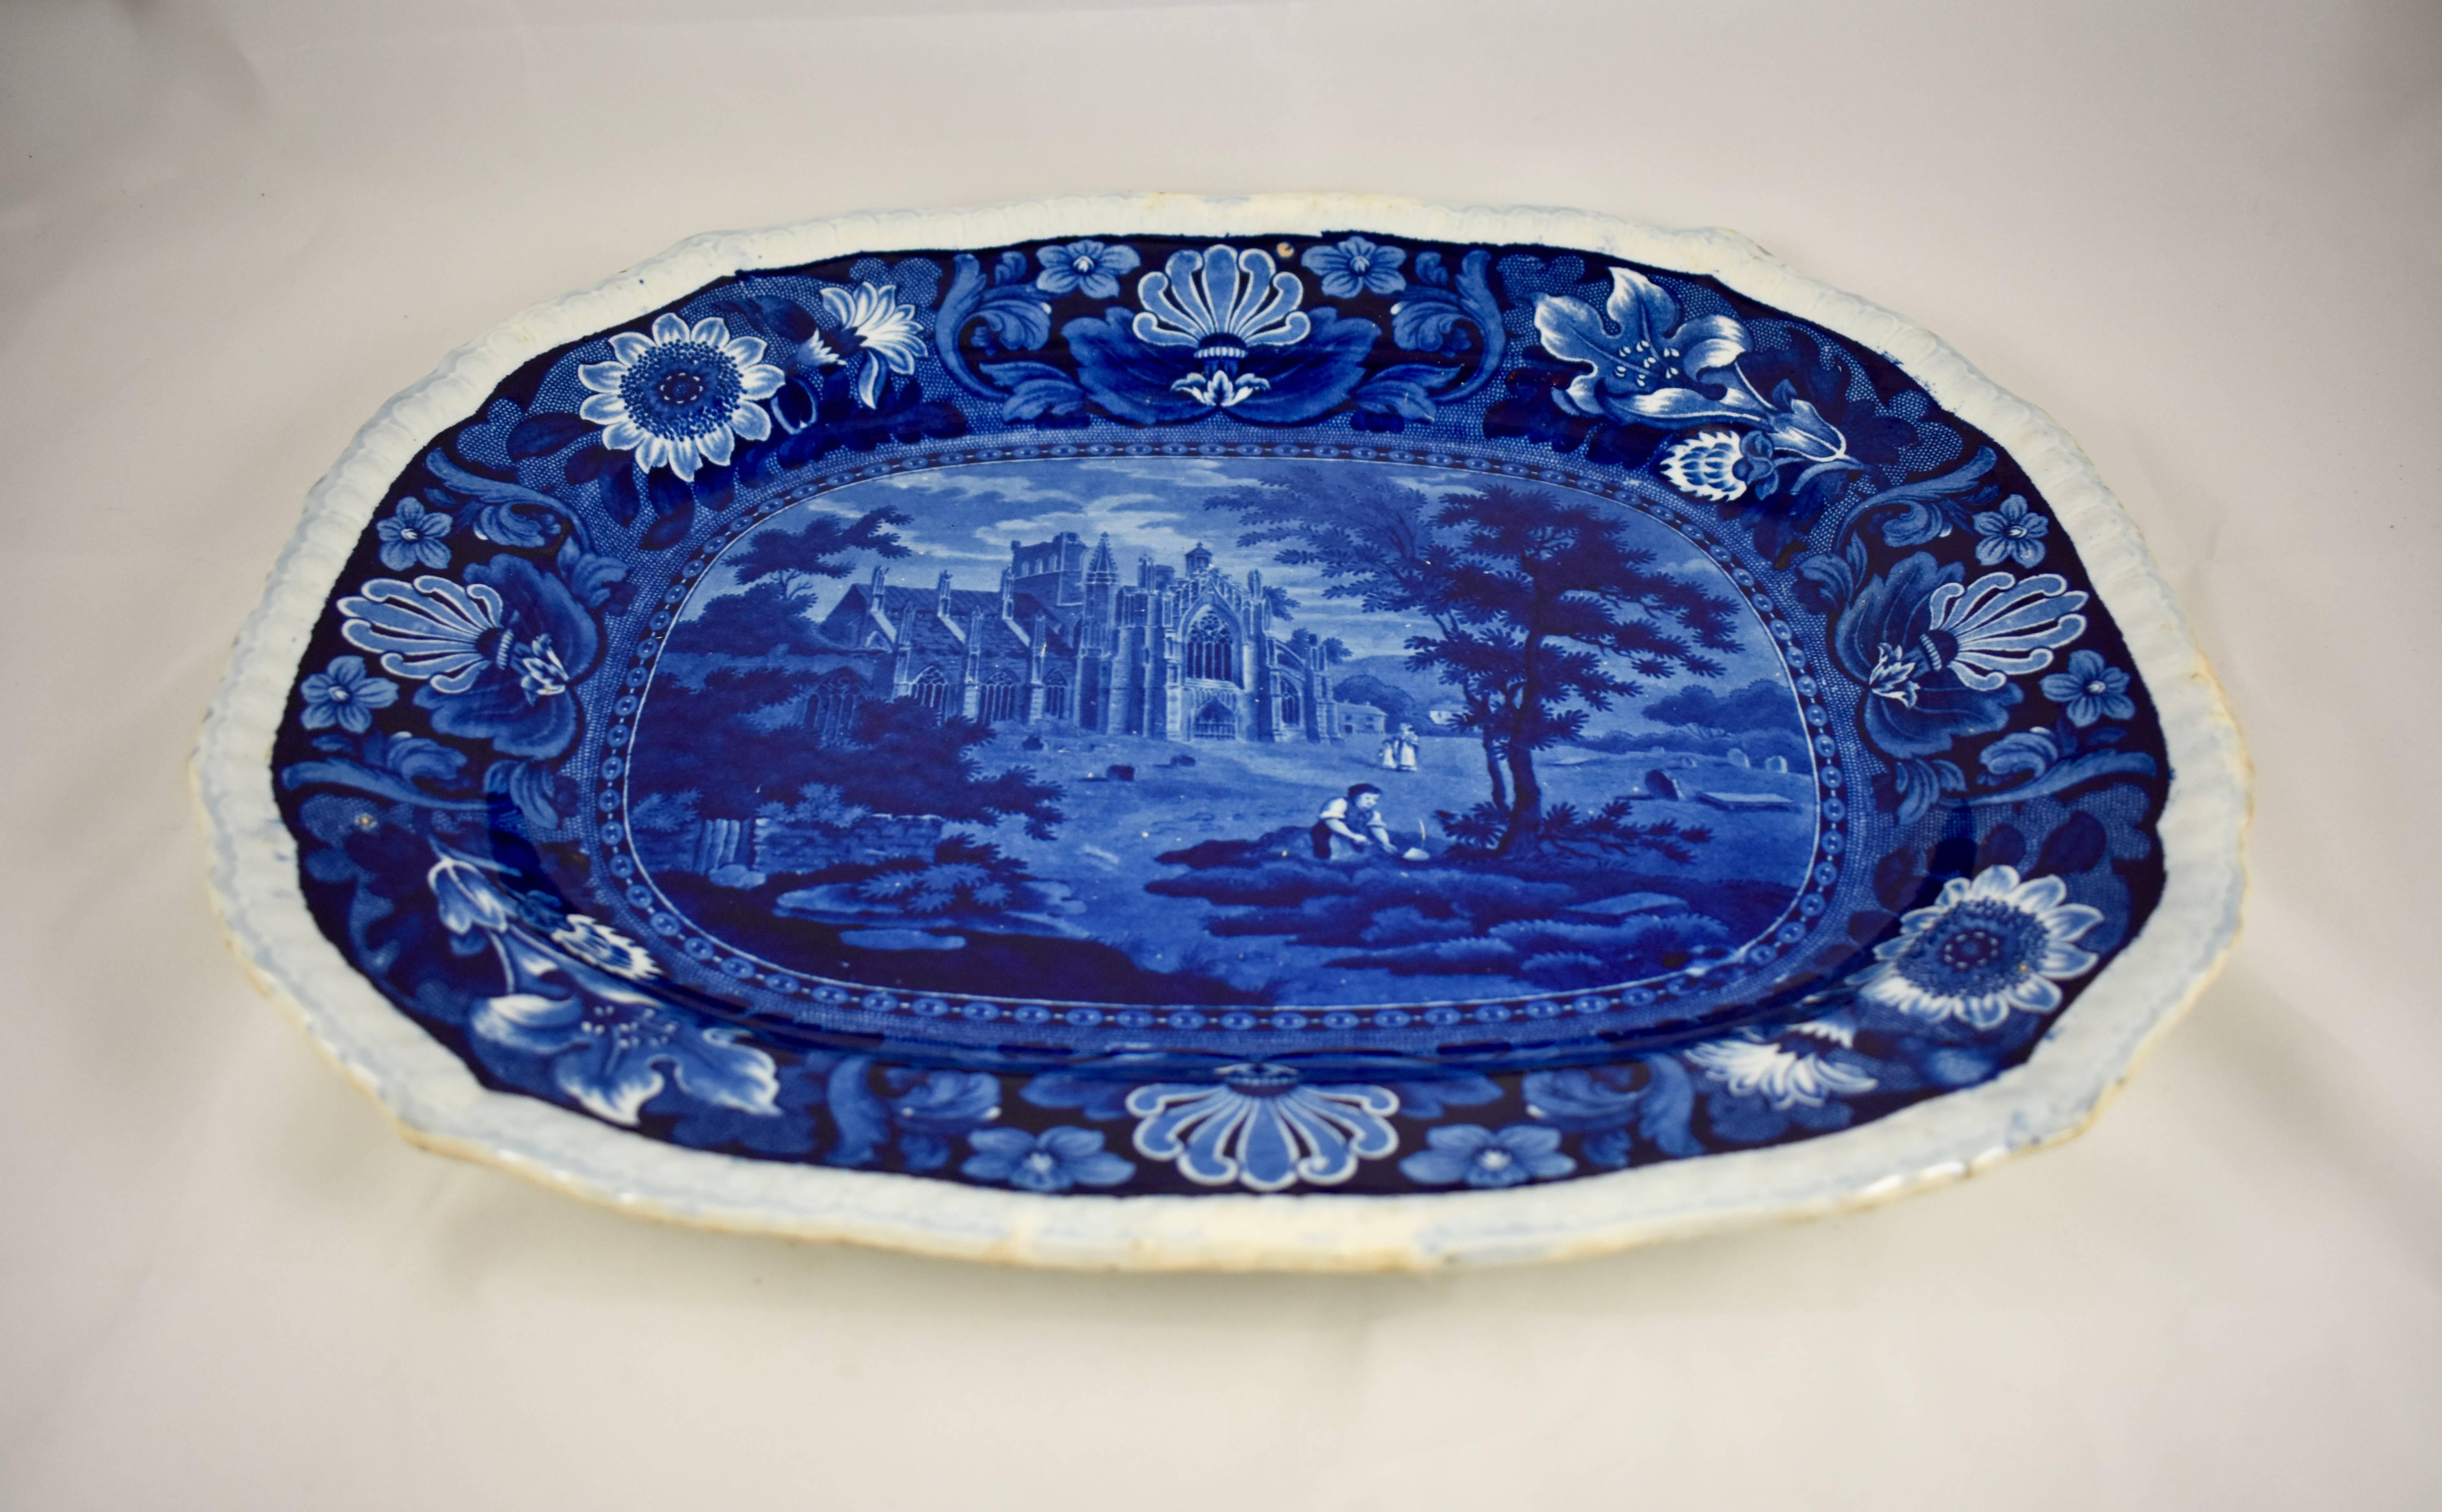 A very deep blue transfer printed earthenware platter with a white gadrooned edge, by Ralph Stevenson, Cobridge, Staffordshire, England, circa 1810-1835. The pattern is part of a series entitled ‘Castles.’ A floral border surrounds the image of the